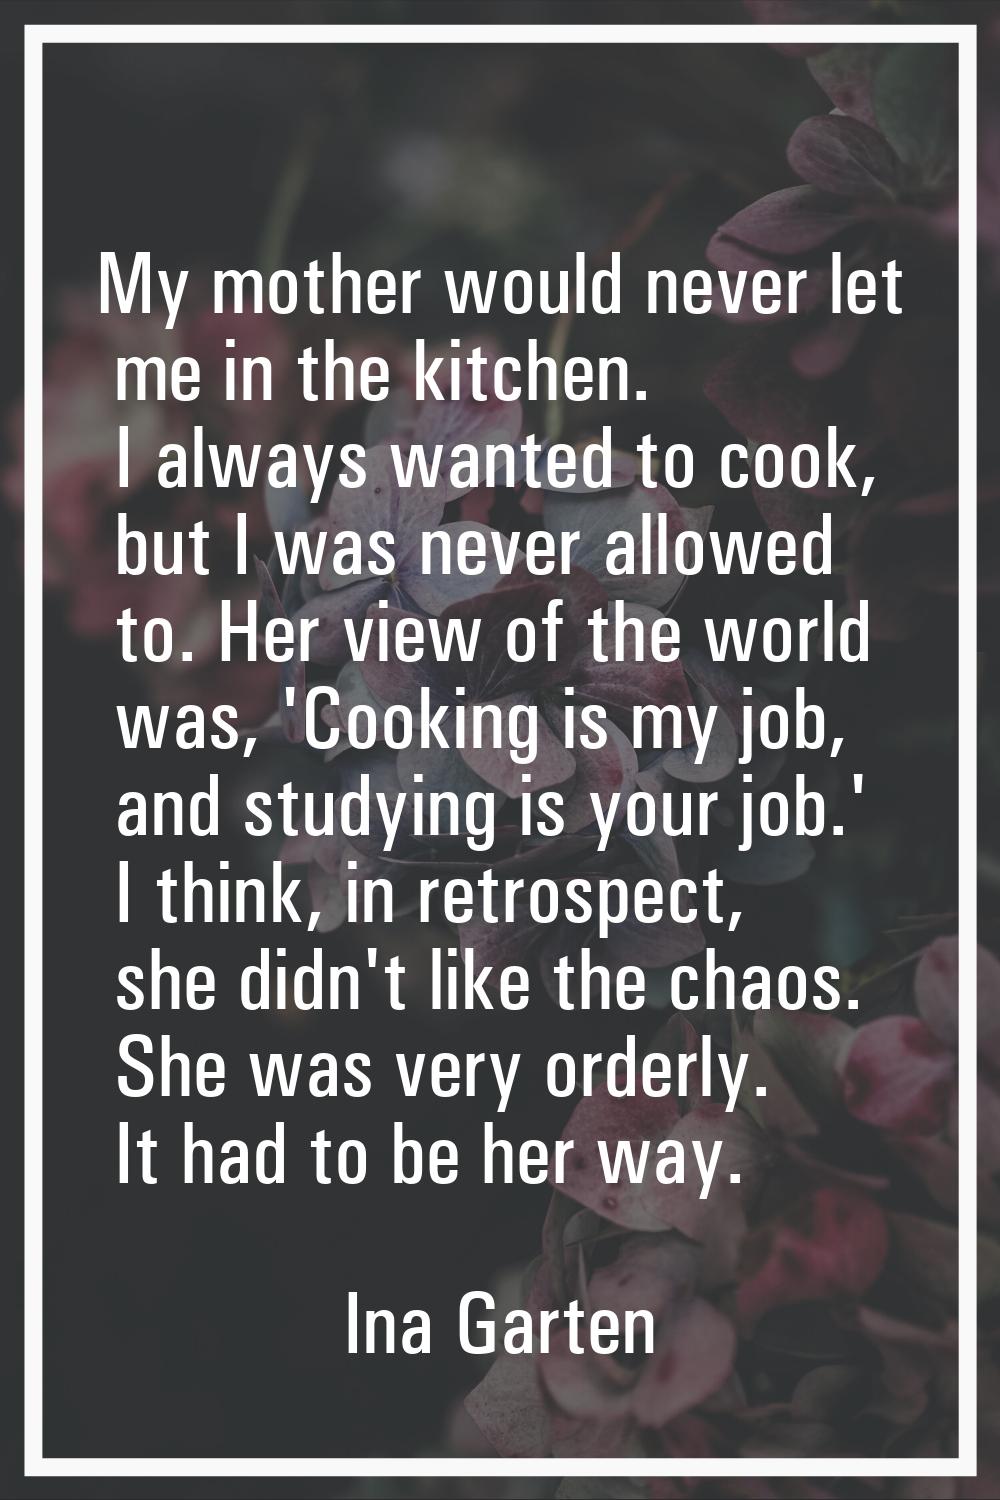 My mother would never let me in the kitchen. I always wanted to cook, but I was never allowed to. H